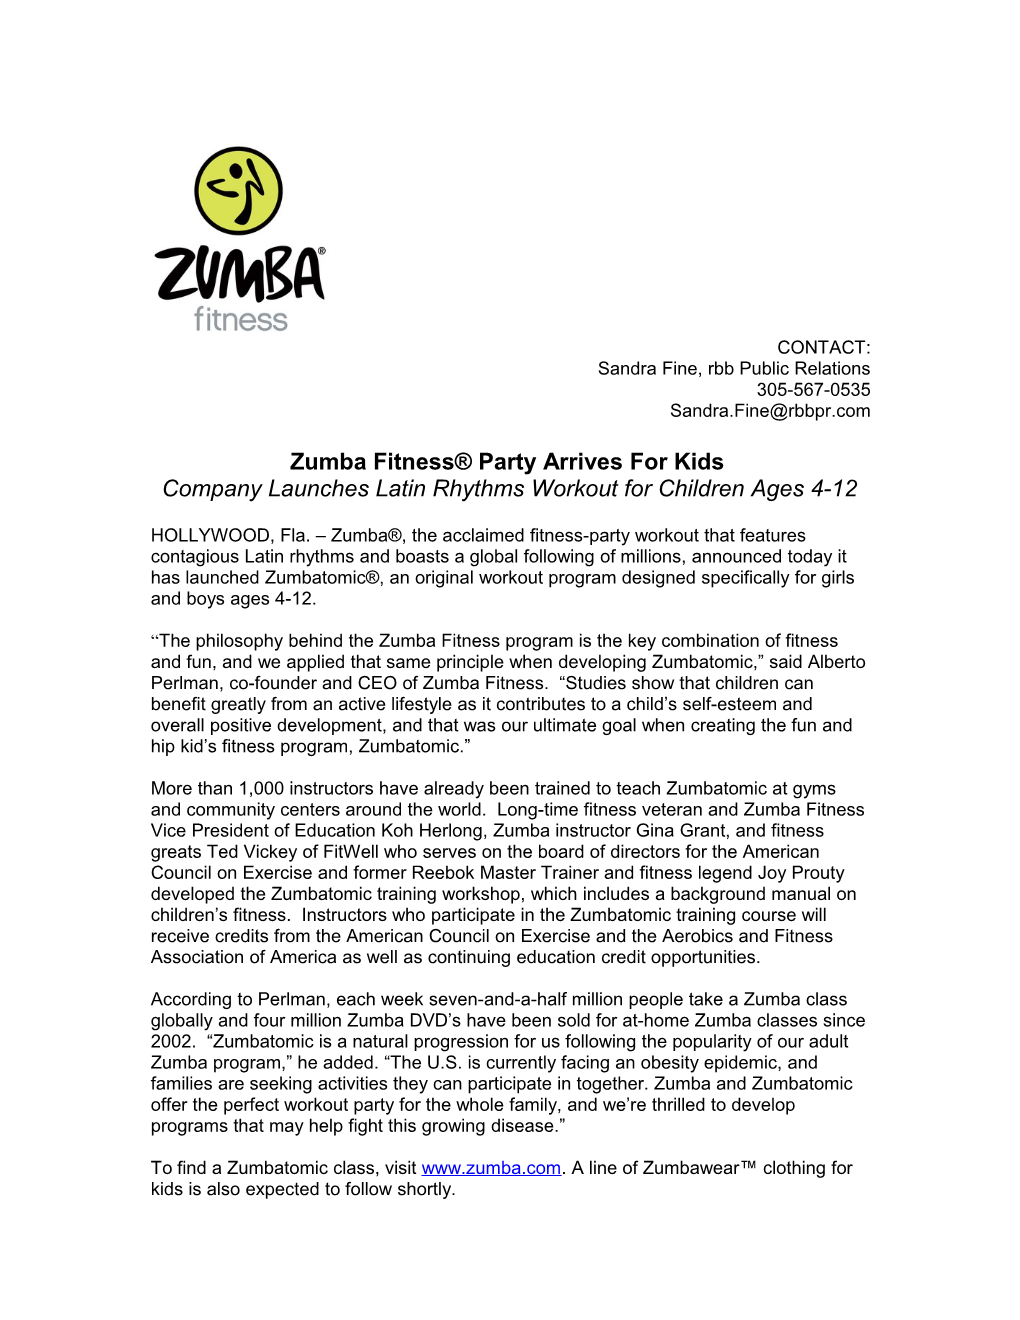 Zumba Fitness Party Arrives for Kids